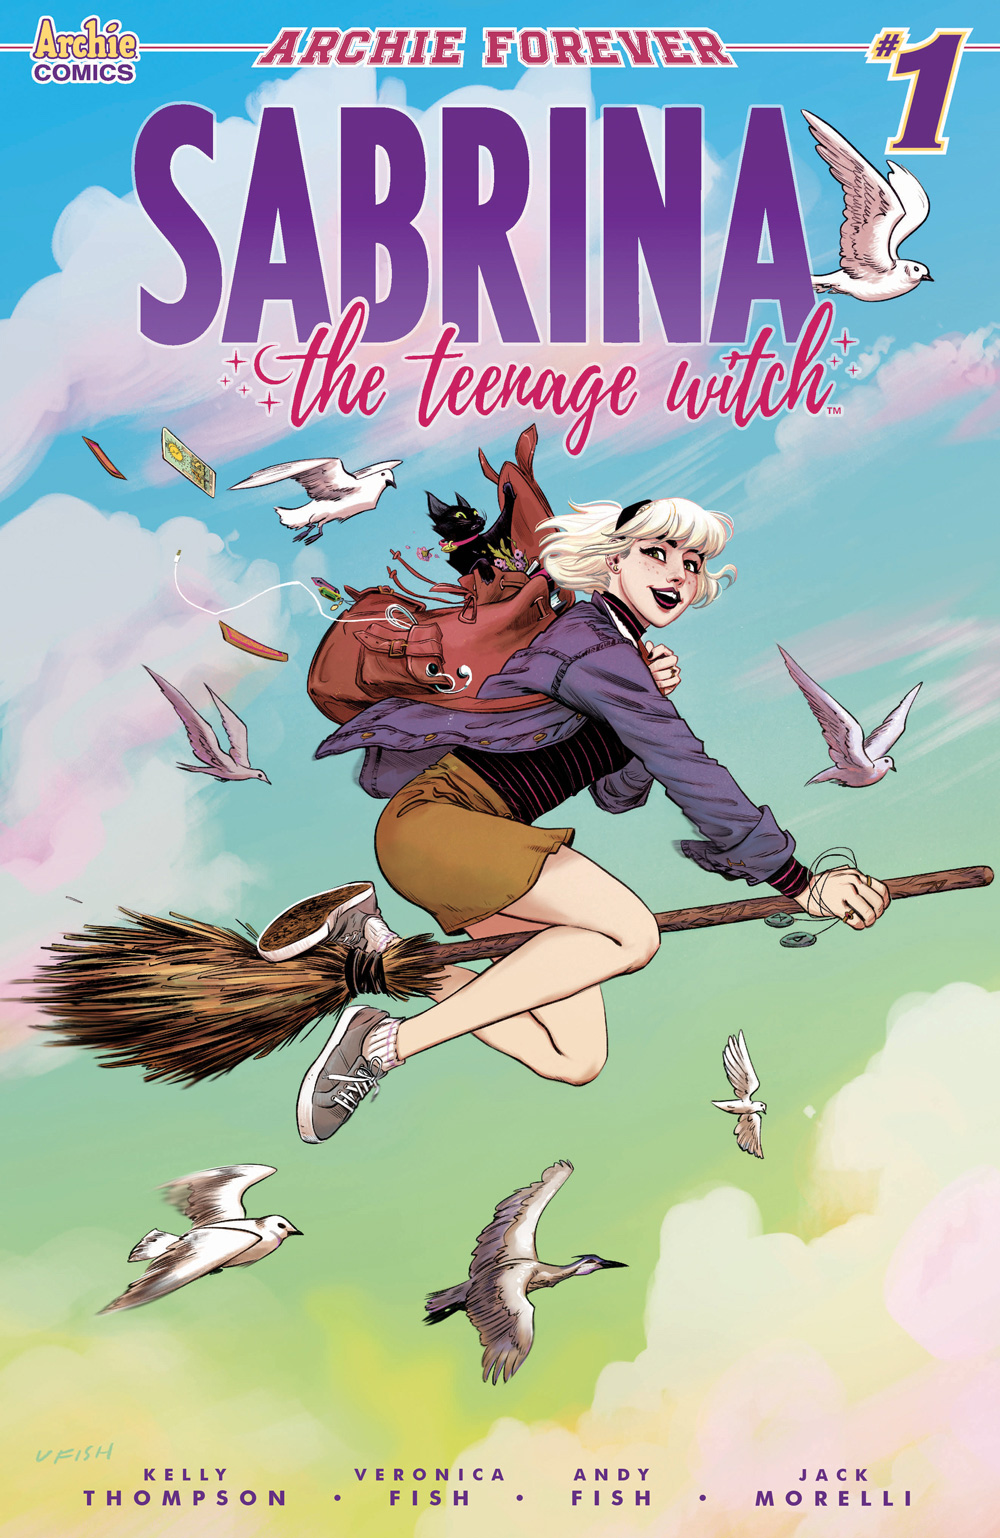 Sabrina the Teenage Witch is back in an all-new comic 